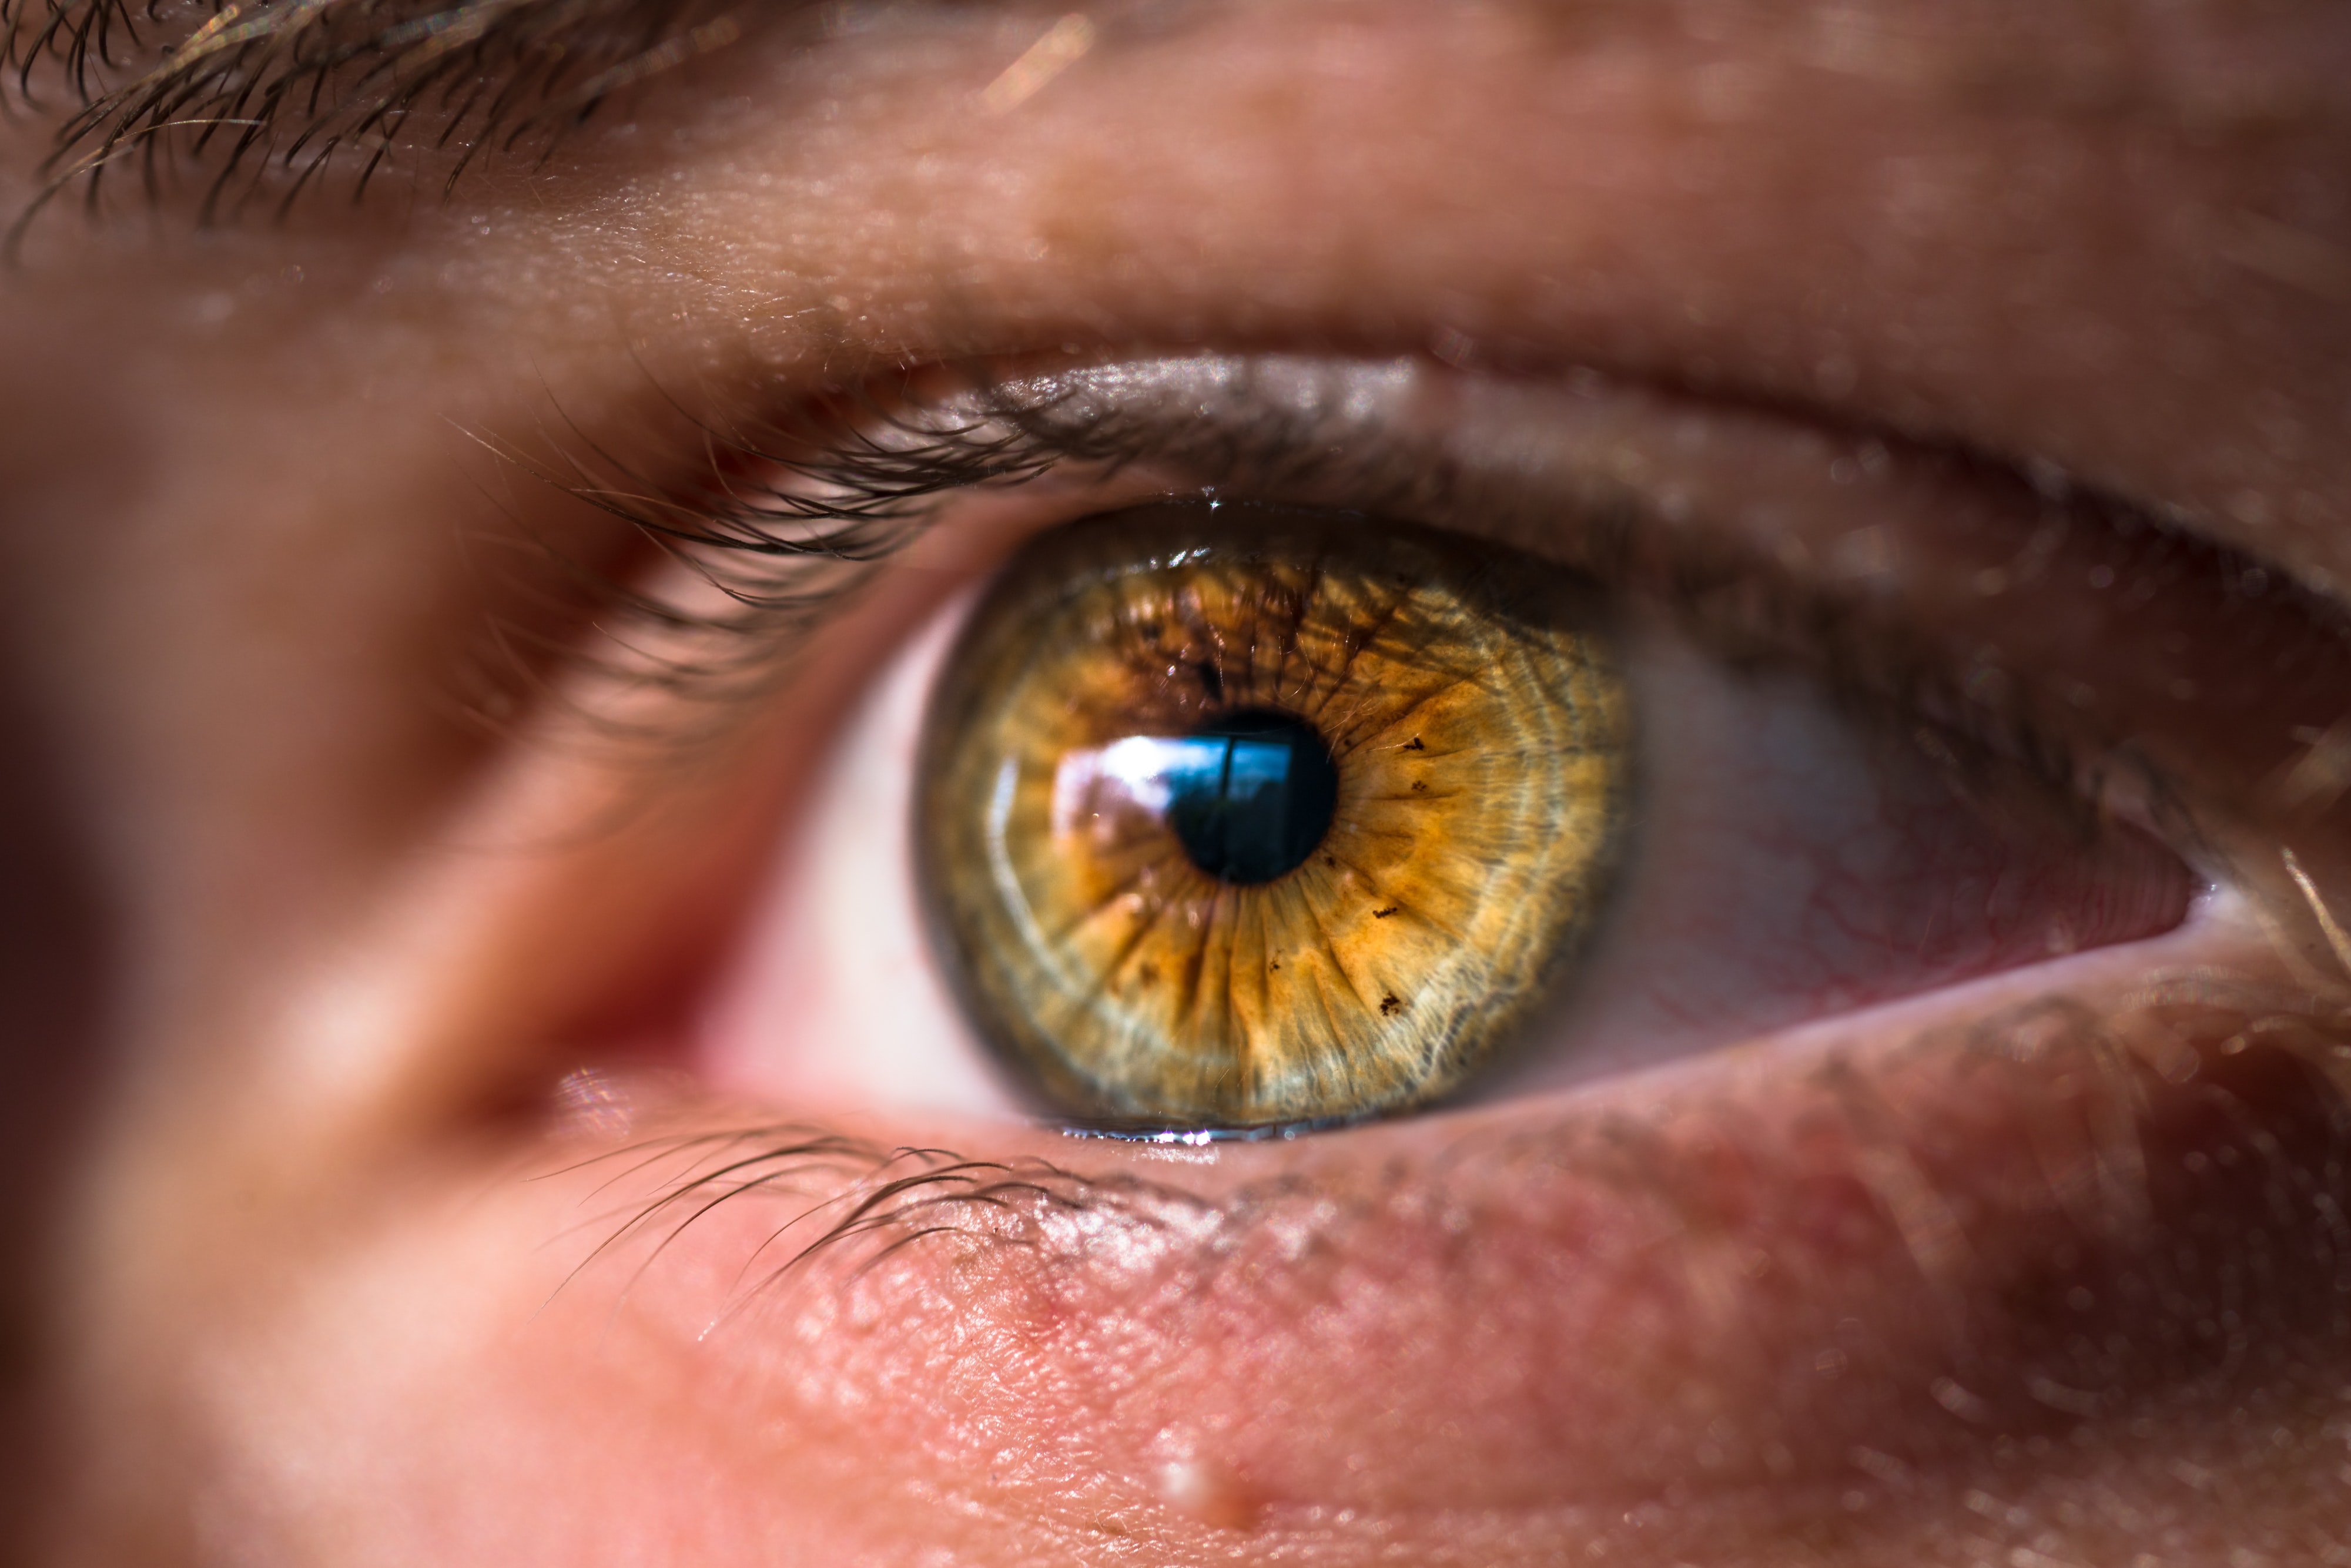 Wondering about LASIK results and how long they last? Here’s a look at this hot topic.